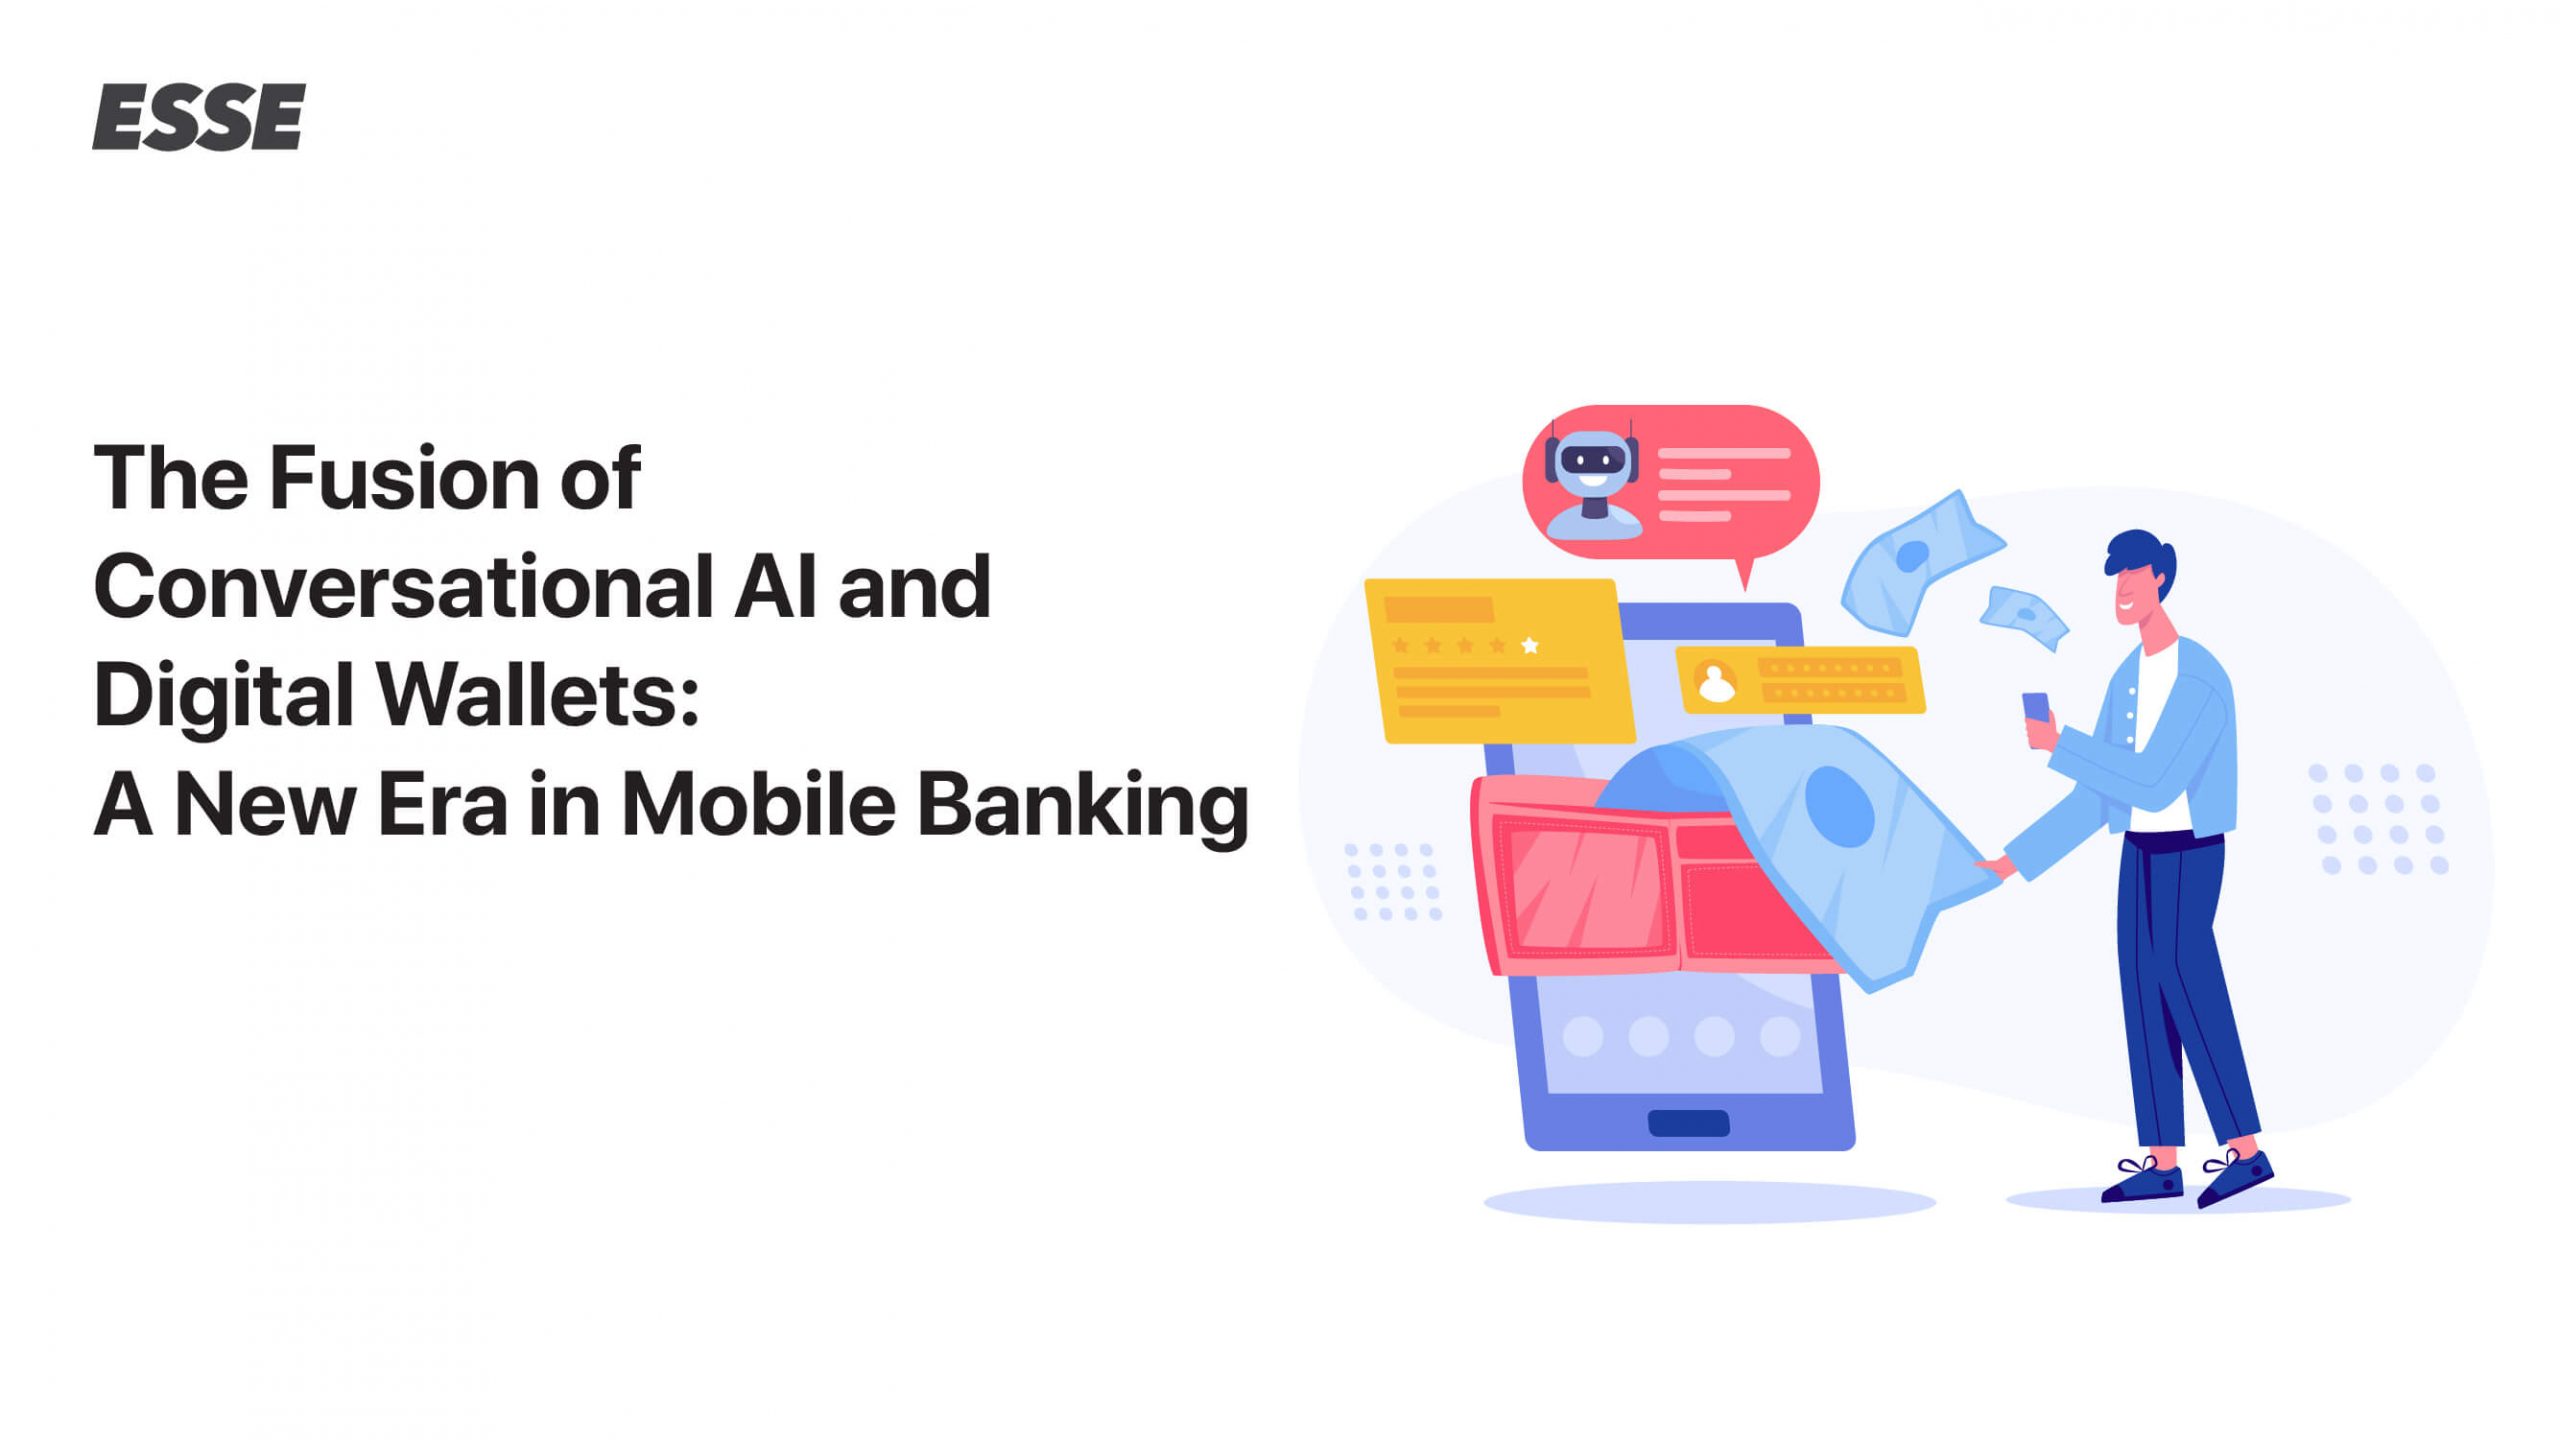 The Fusion of Conversational AI and Digital Wallets: A New Era in Mobile Banking